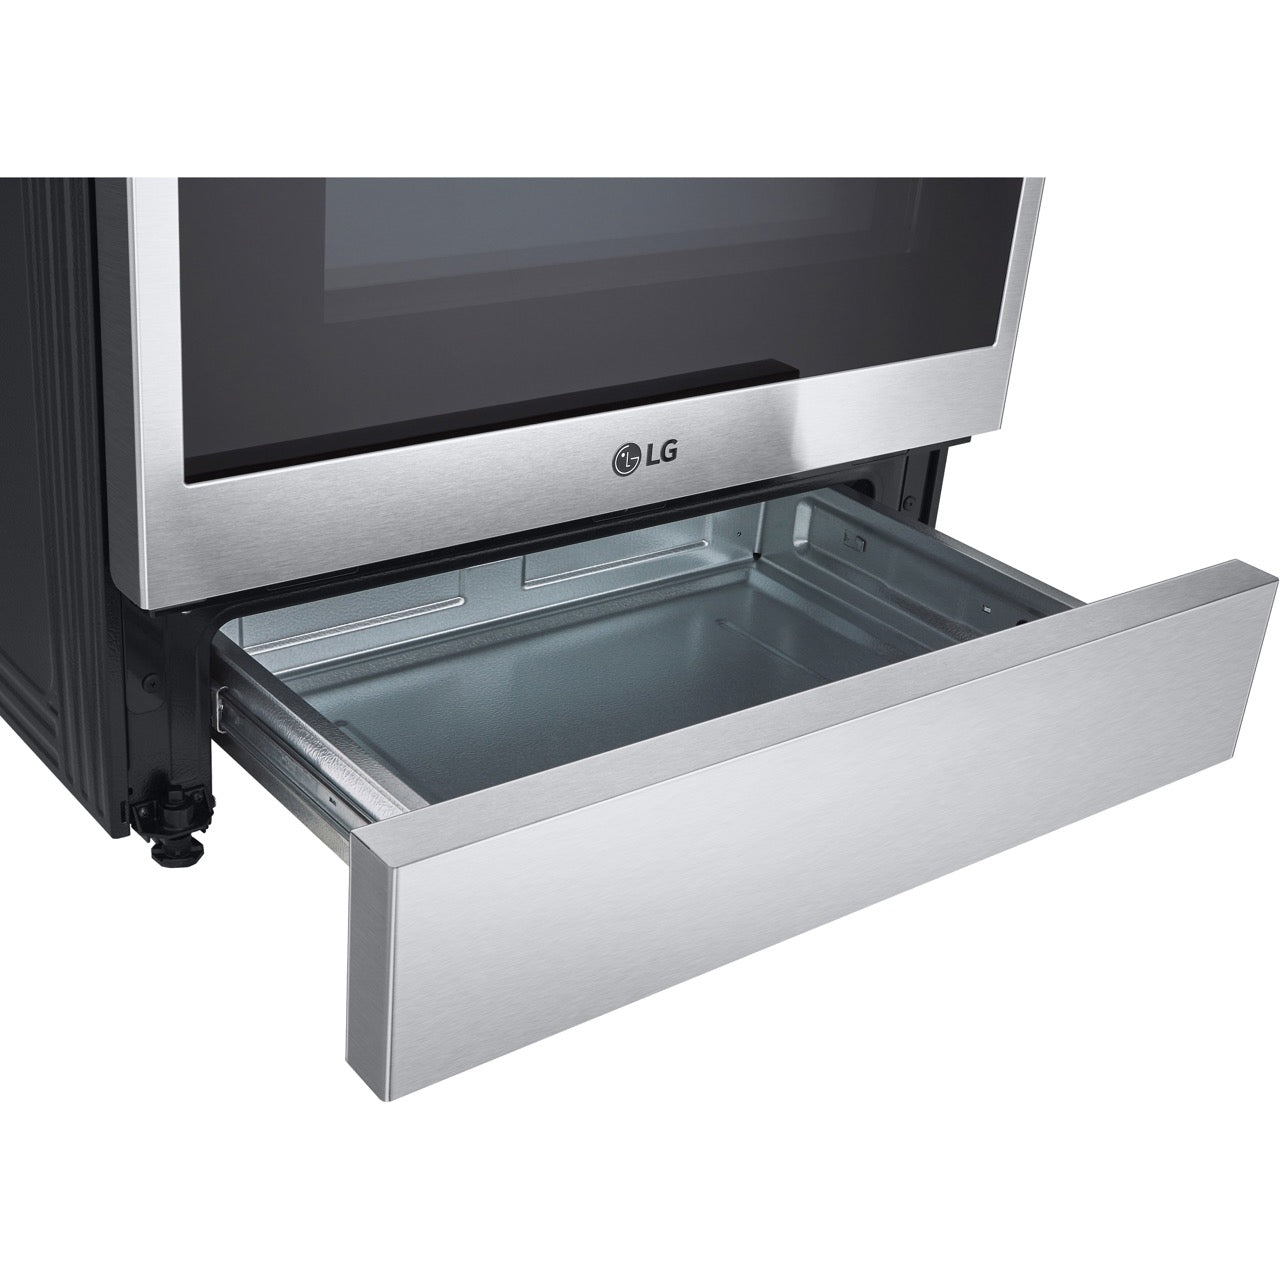 LG 6.3-Cu. Ft. Smart Wi-Fi Enabled ProBake Convection InstaView Gas Slide-in Range with Air Fry, Stainless Steel (LSGL6335F)